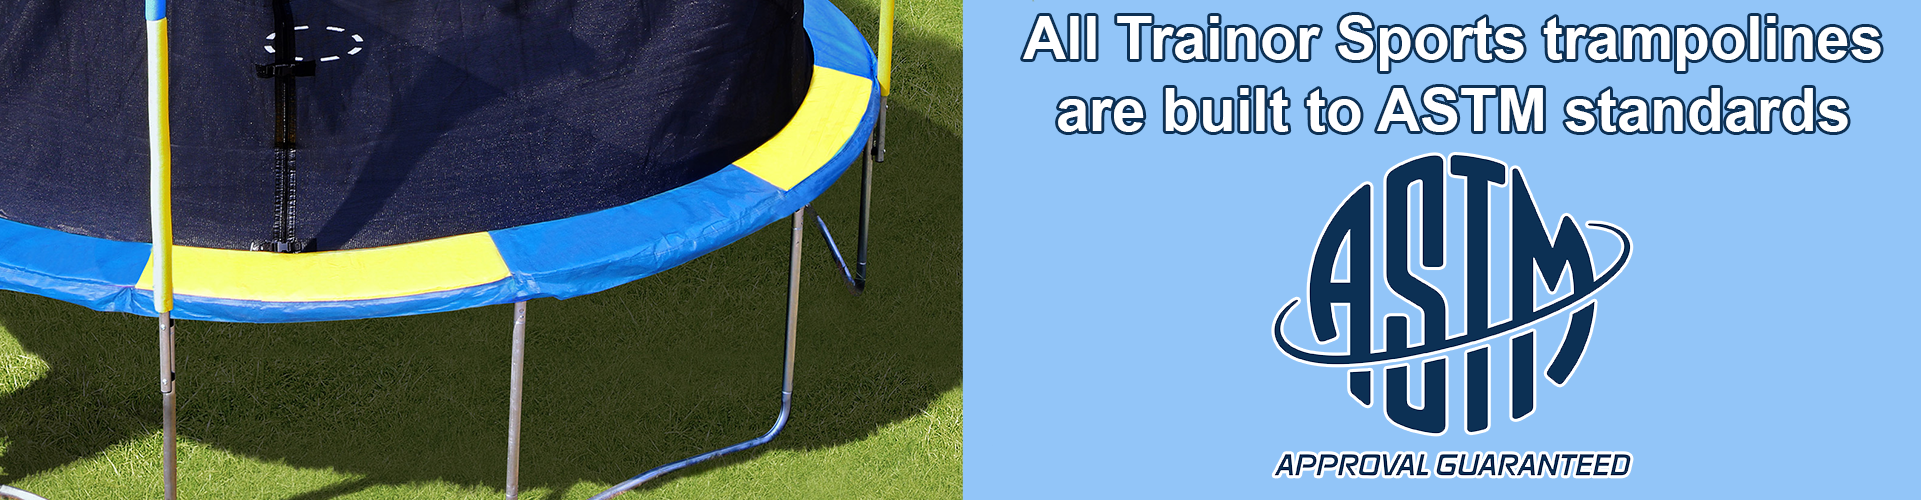 All Trainor Sports trampolines are built to ASTM standards.